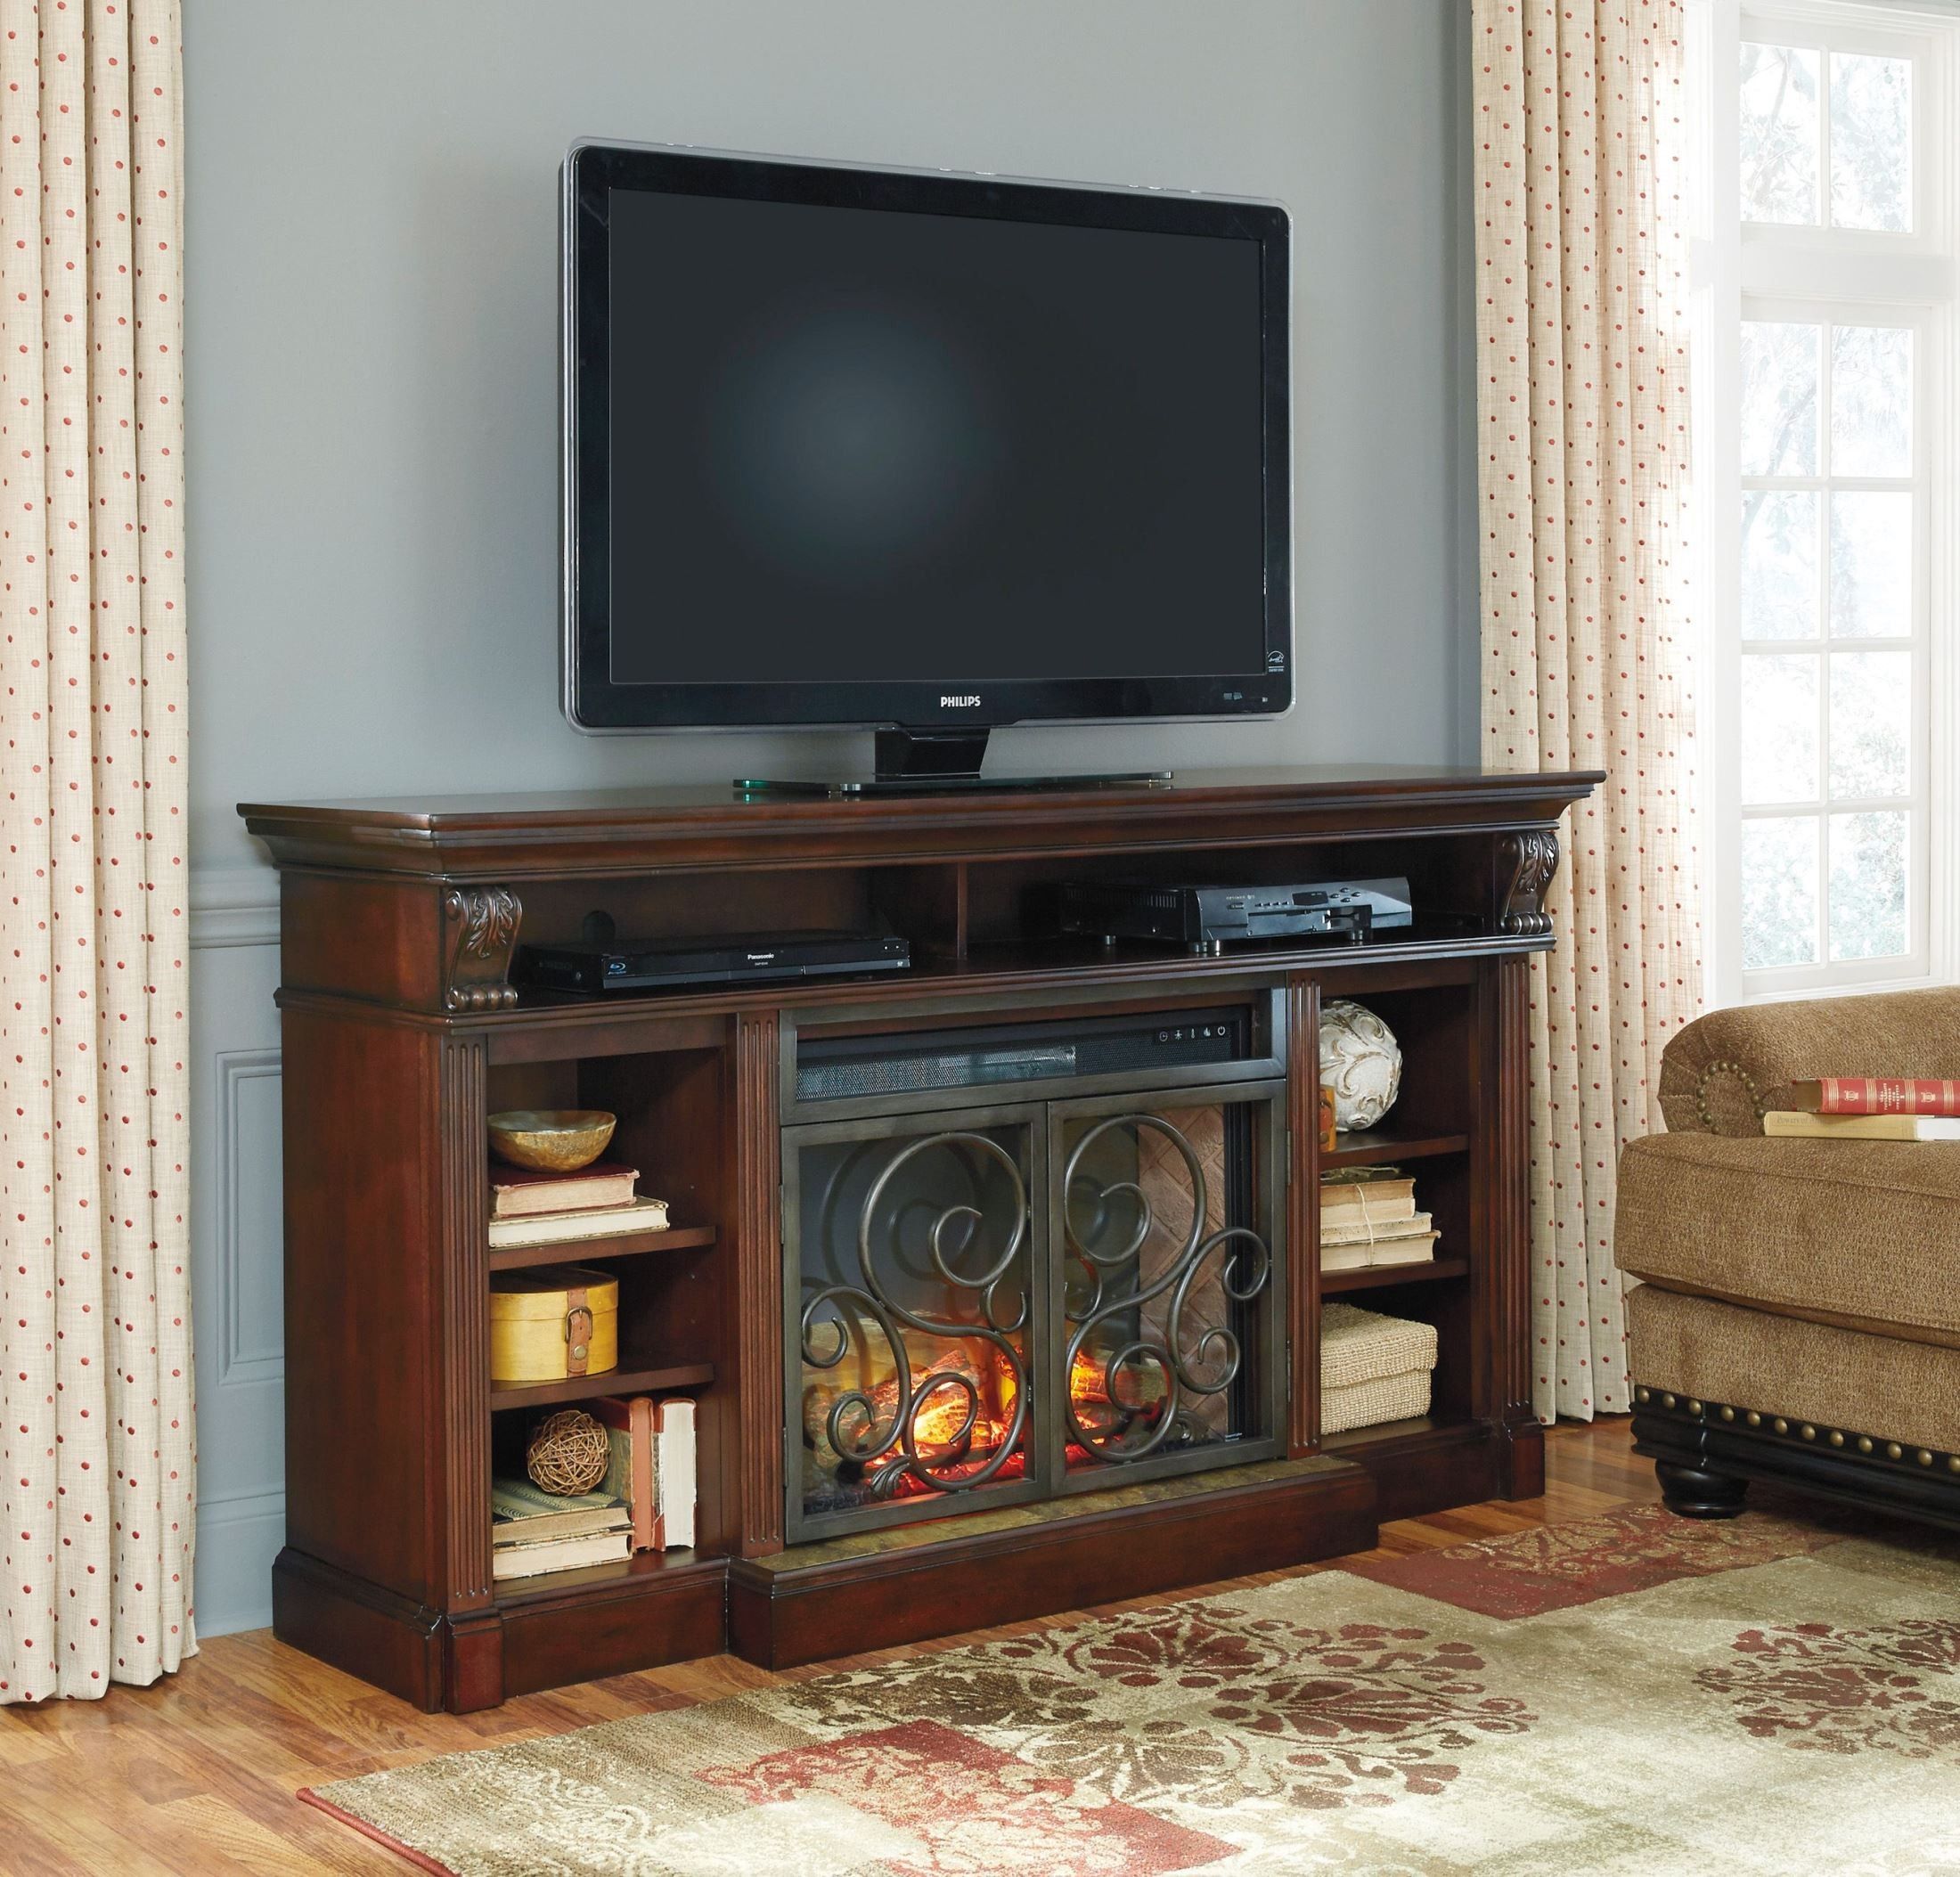 Large Entertainment Center with Fireplace Luxury ashley Furniture attic Fireplaces